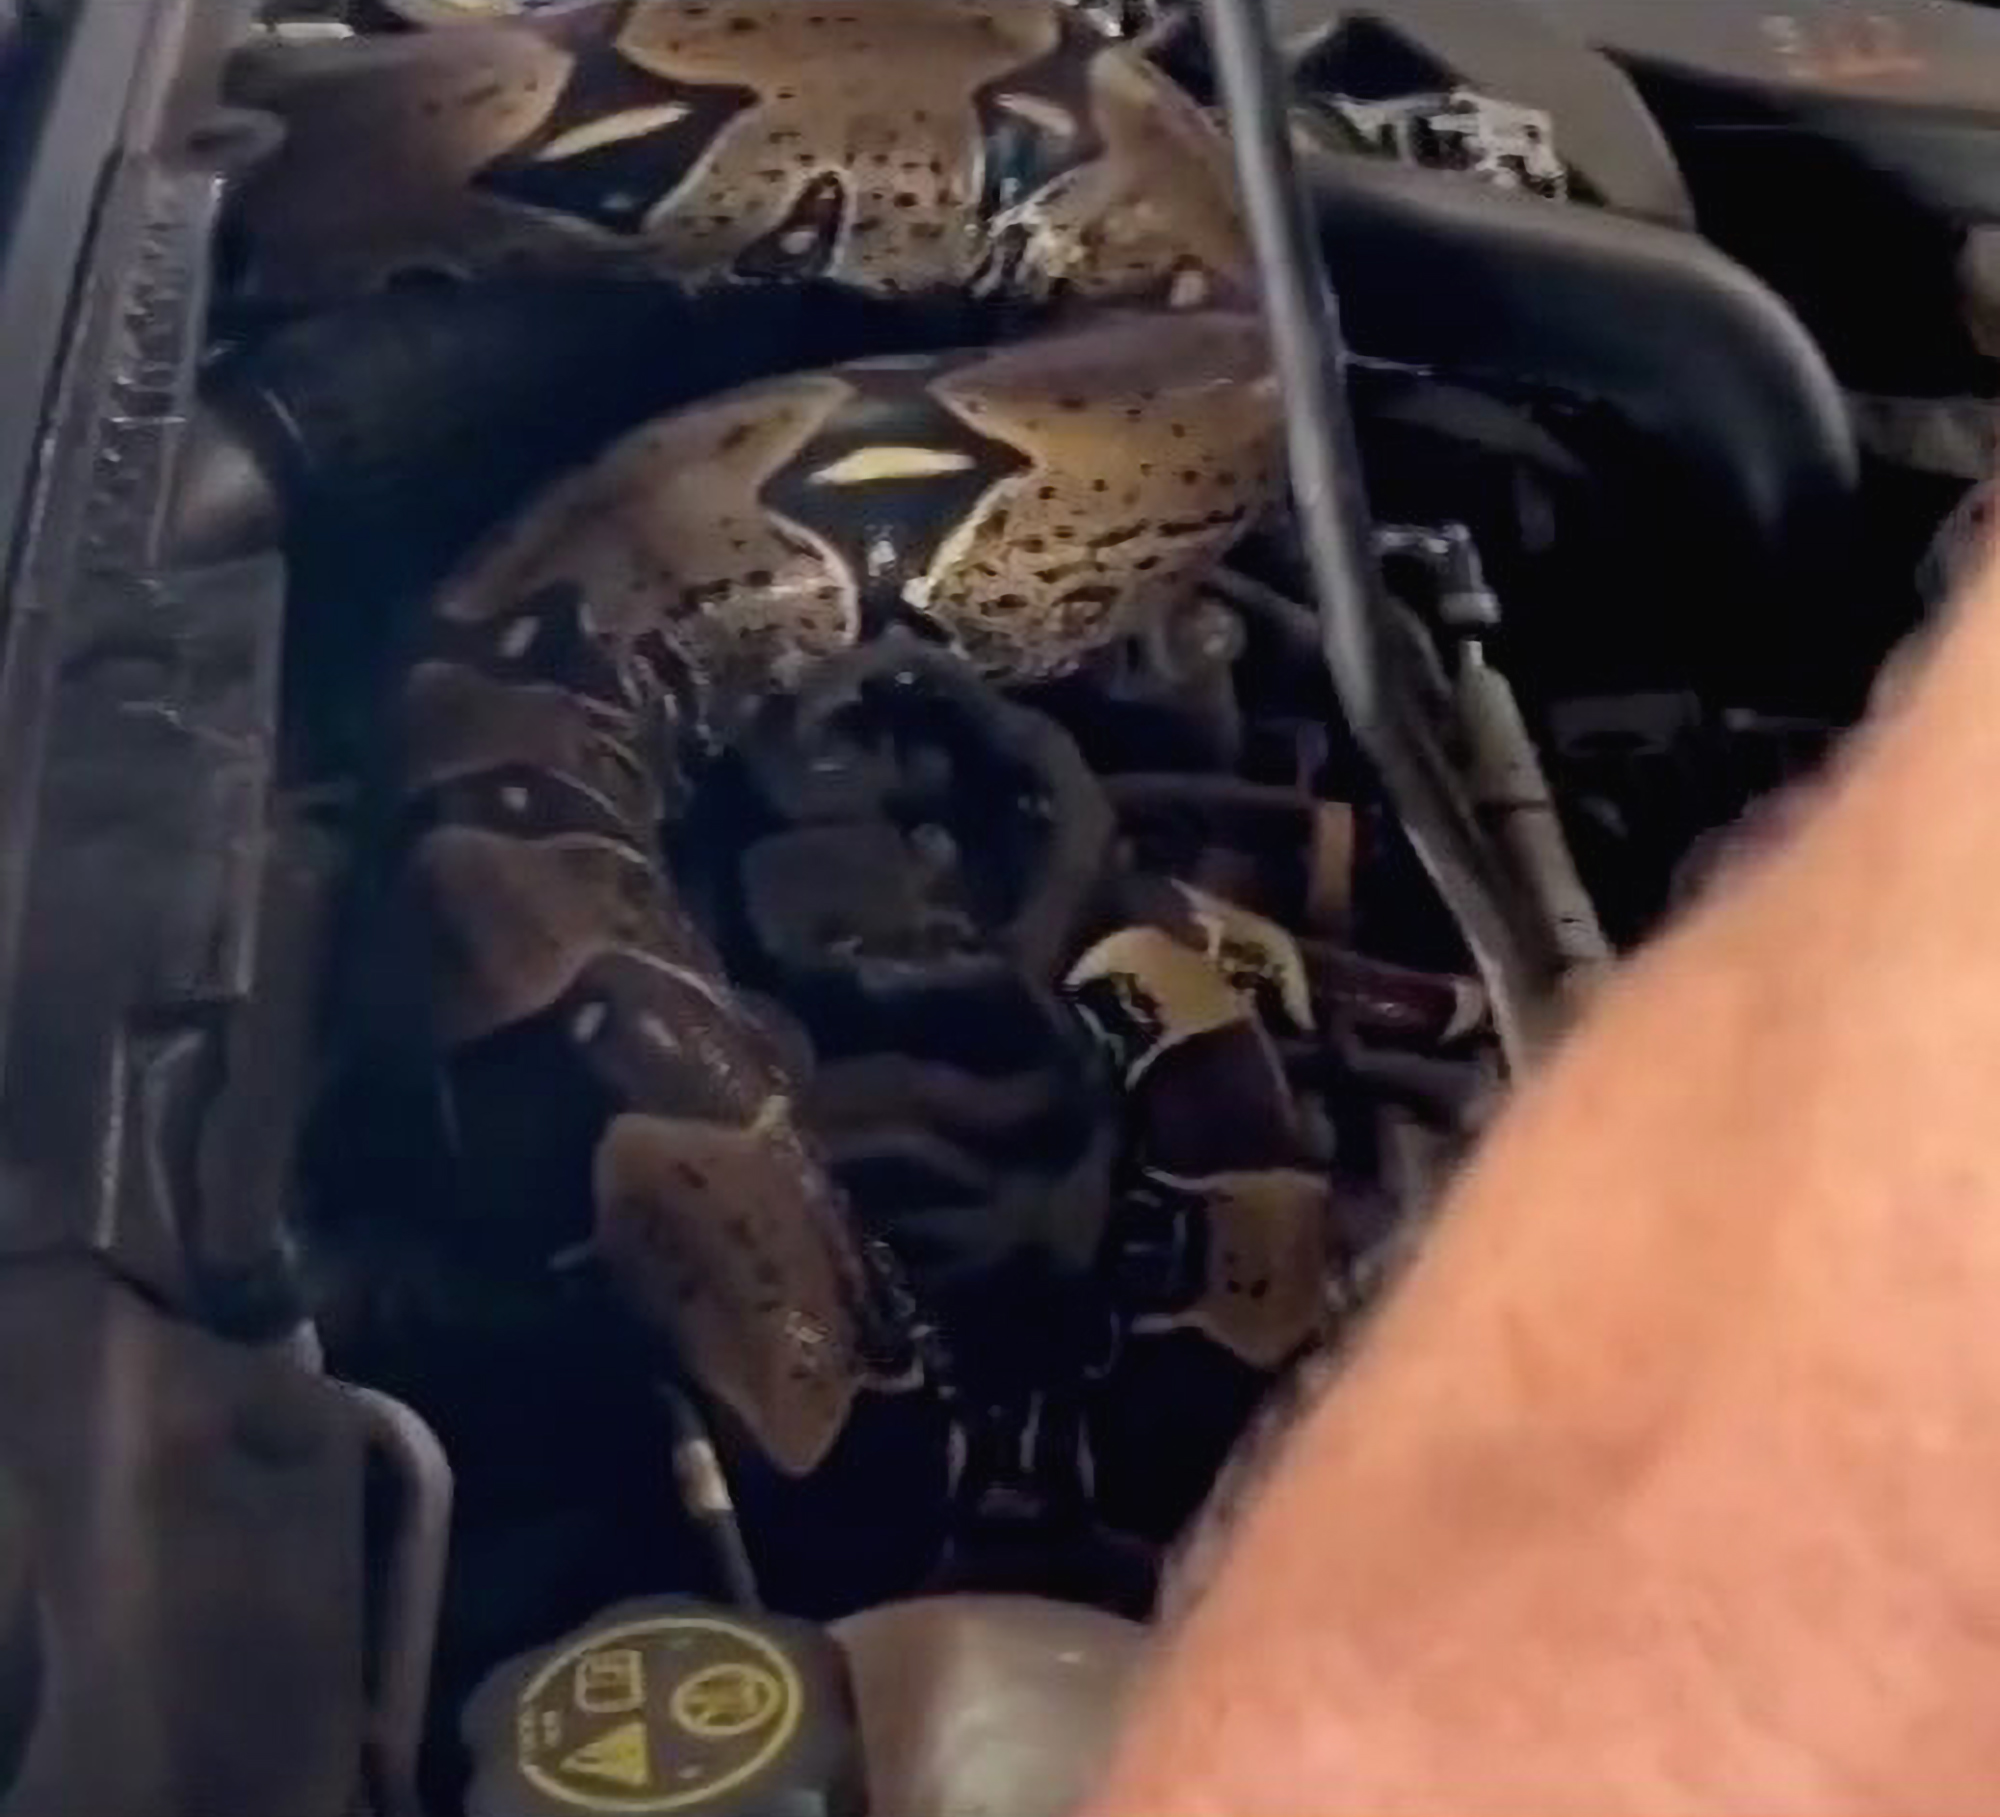 Read more about the article Mechanic Drops Hood After Finding 7-Foot Boa Constrictor Was Reason For Gear Problem